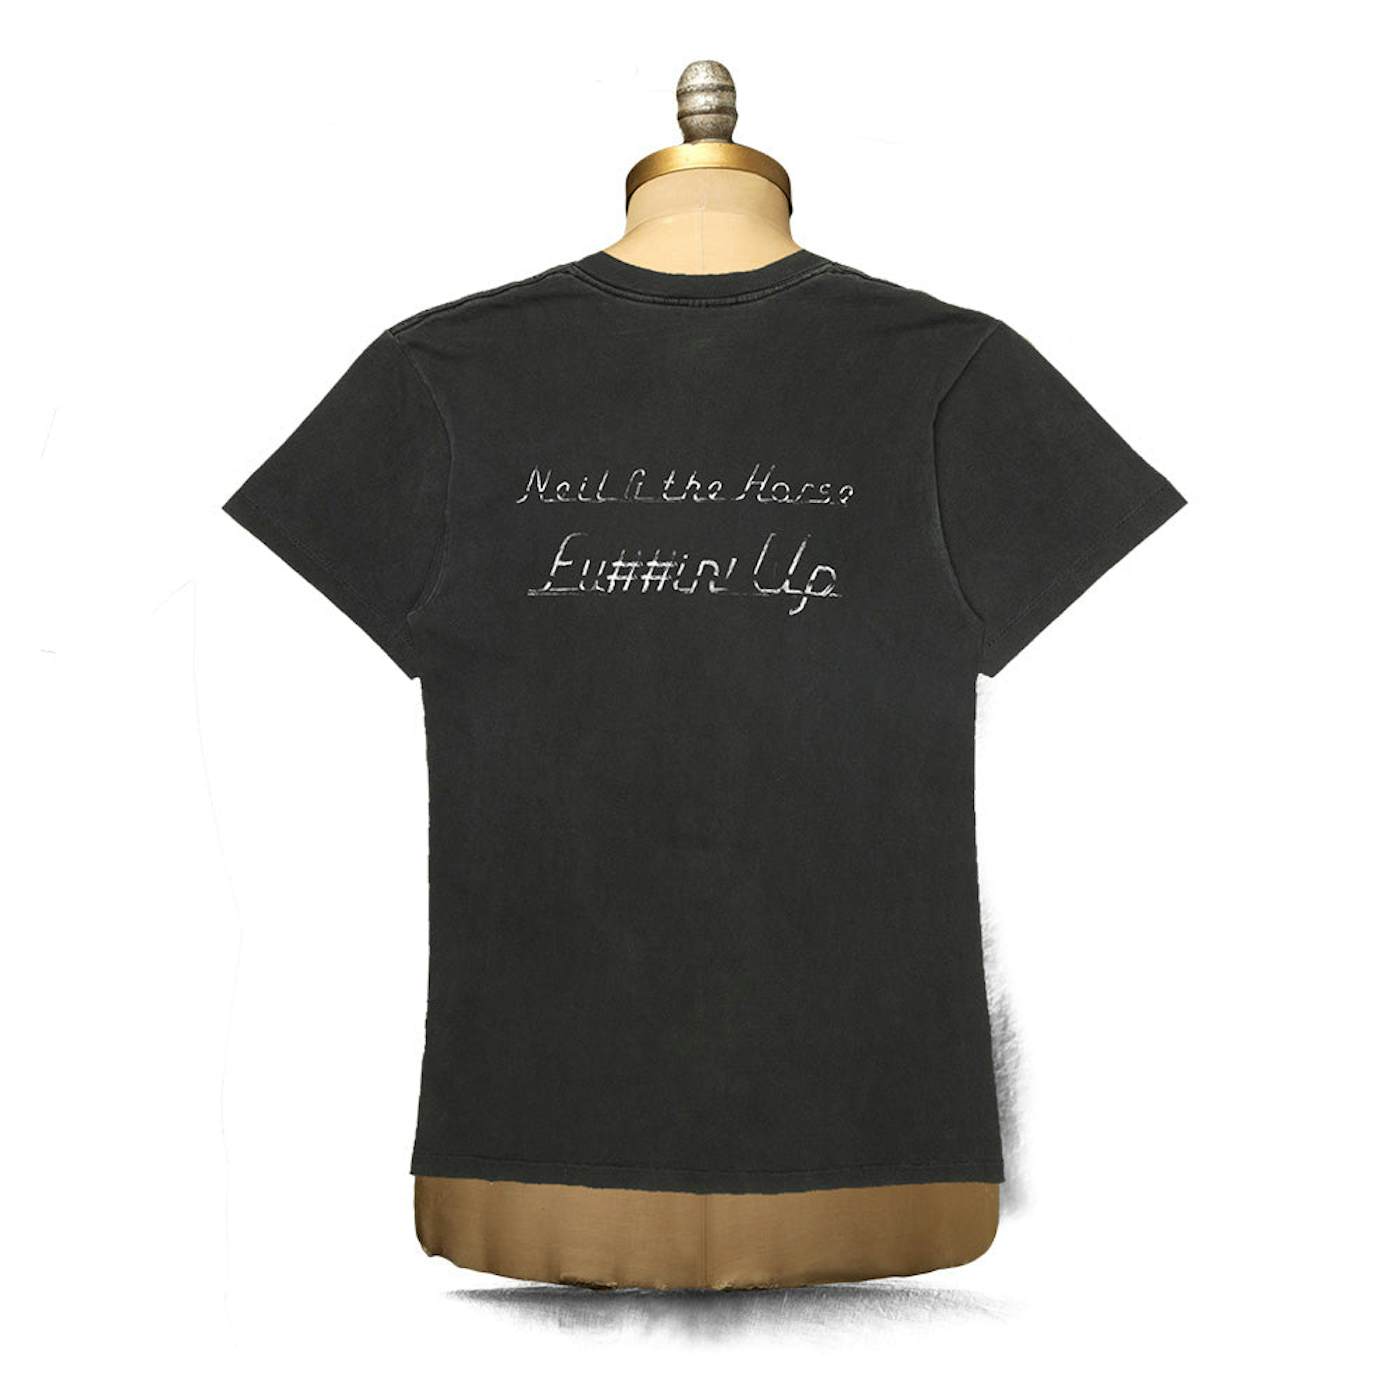 Neil Young Fu##in' Up T-Shirt